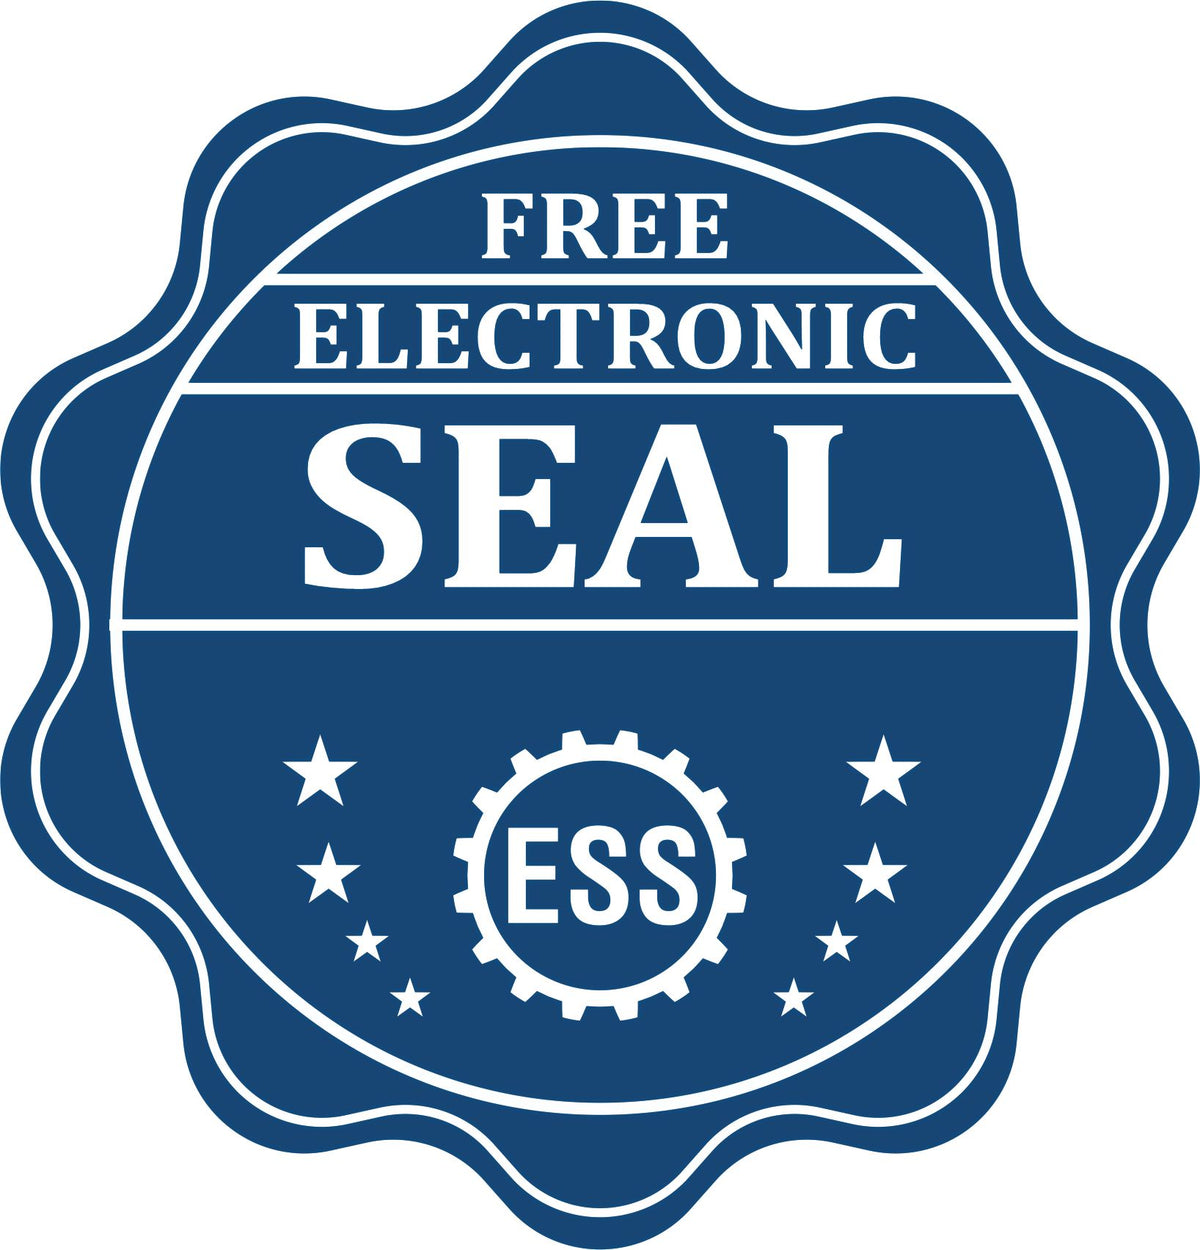 A badge showing a free electronic seal for the Premium MaxLight Pre-Inked Virginia Engineering Stamp with stars and the ESS gear on the emblem.